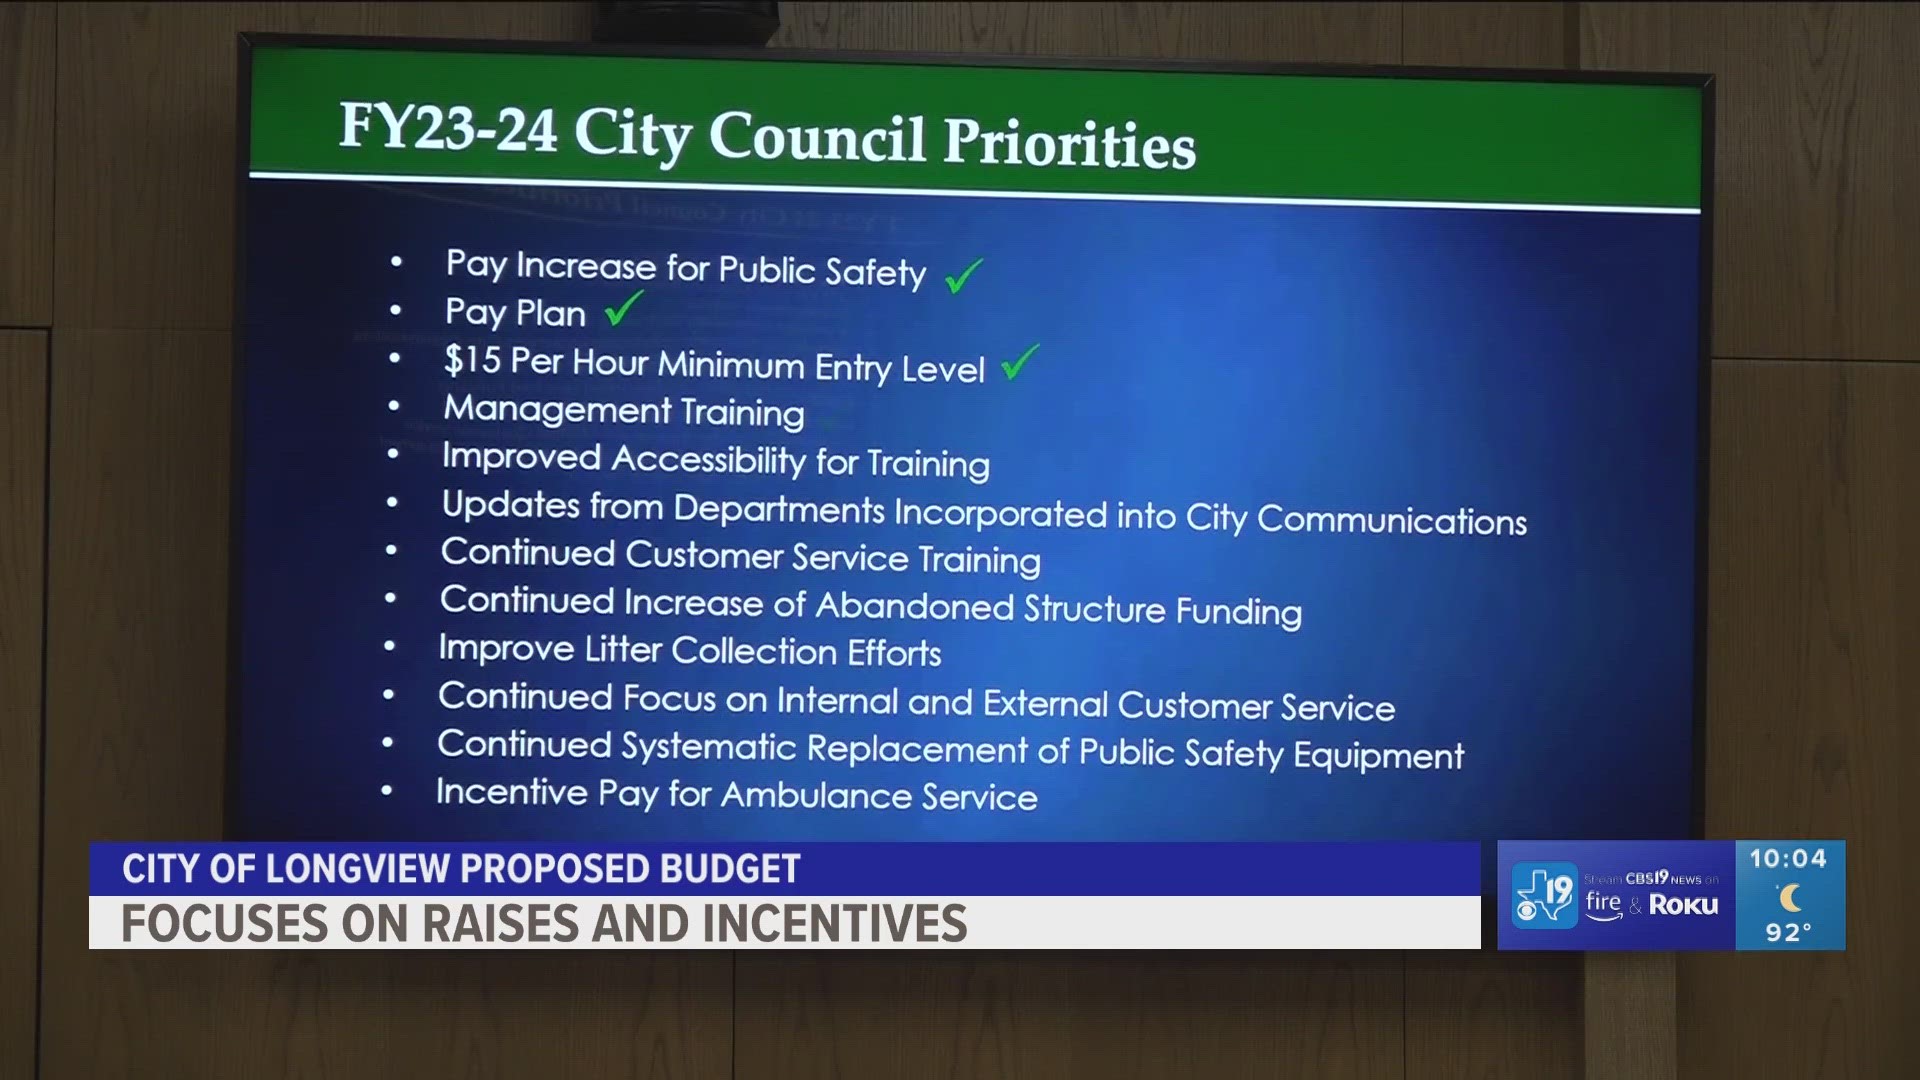 The city will use an estimation of over 95 million dollars to combat the increase of resignations of department officials.